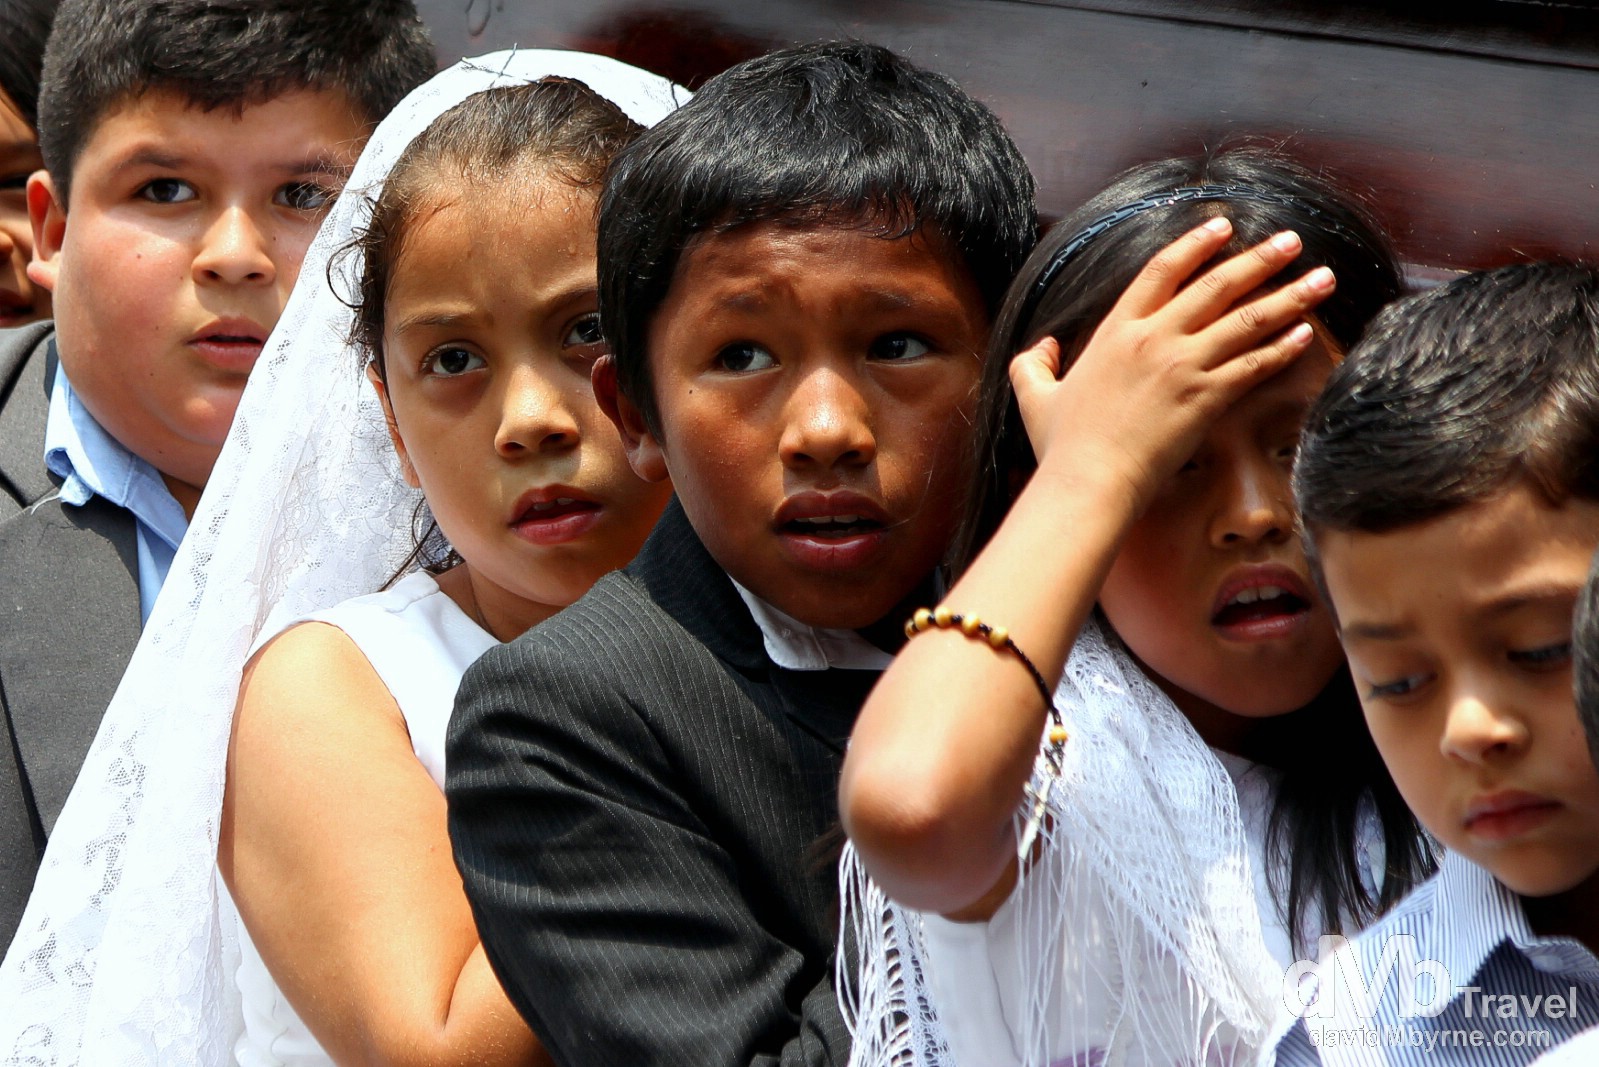 Children carrying a coffin as part of a religious ceremony in Parque Central, Antigua, Guatemala. May 19th 2013.